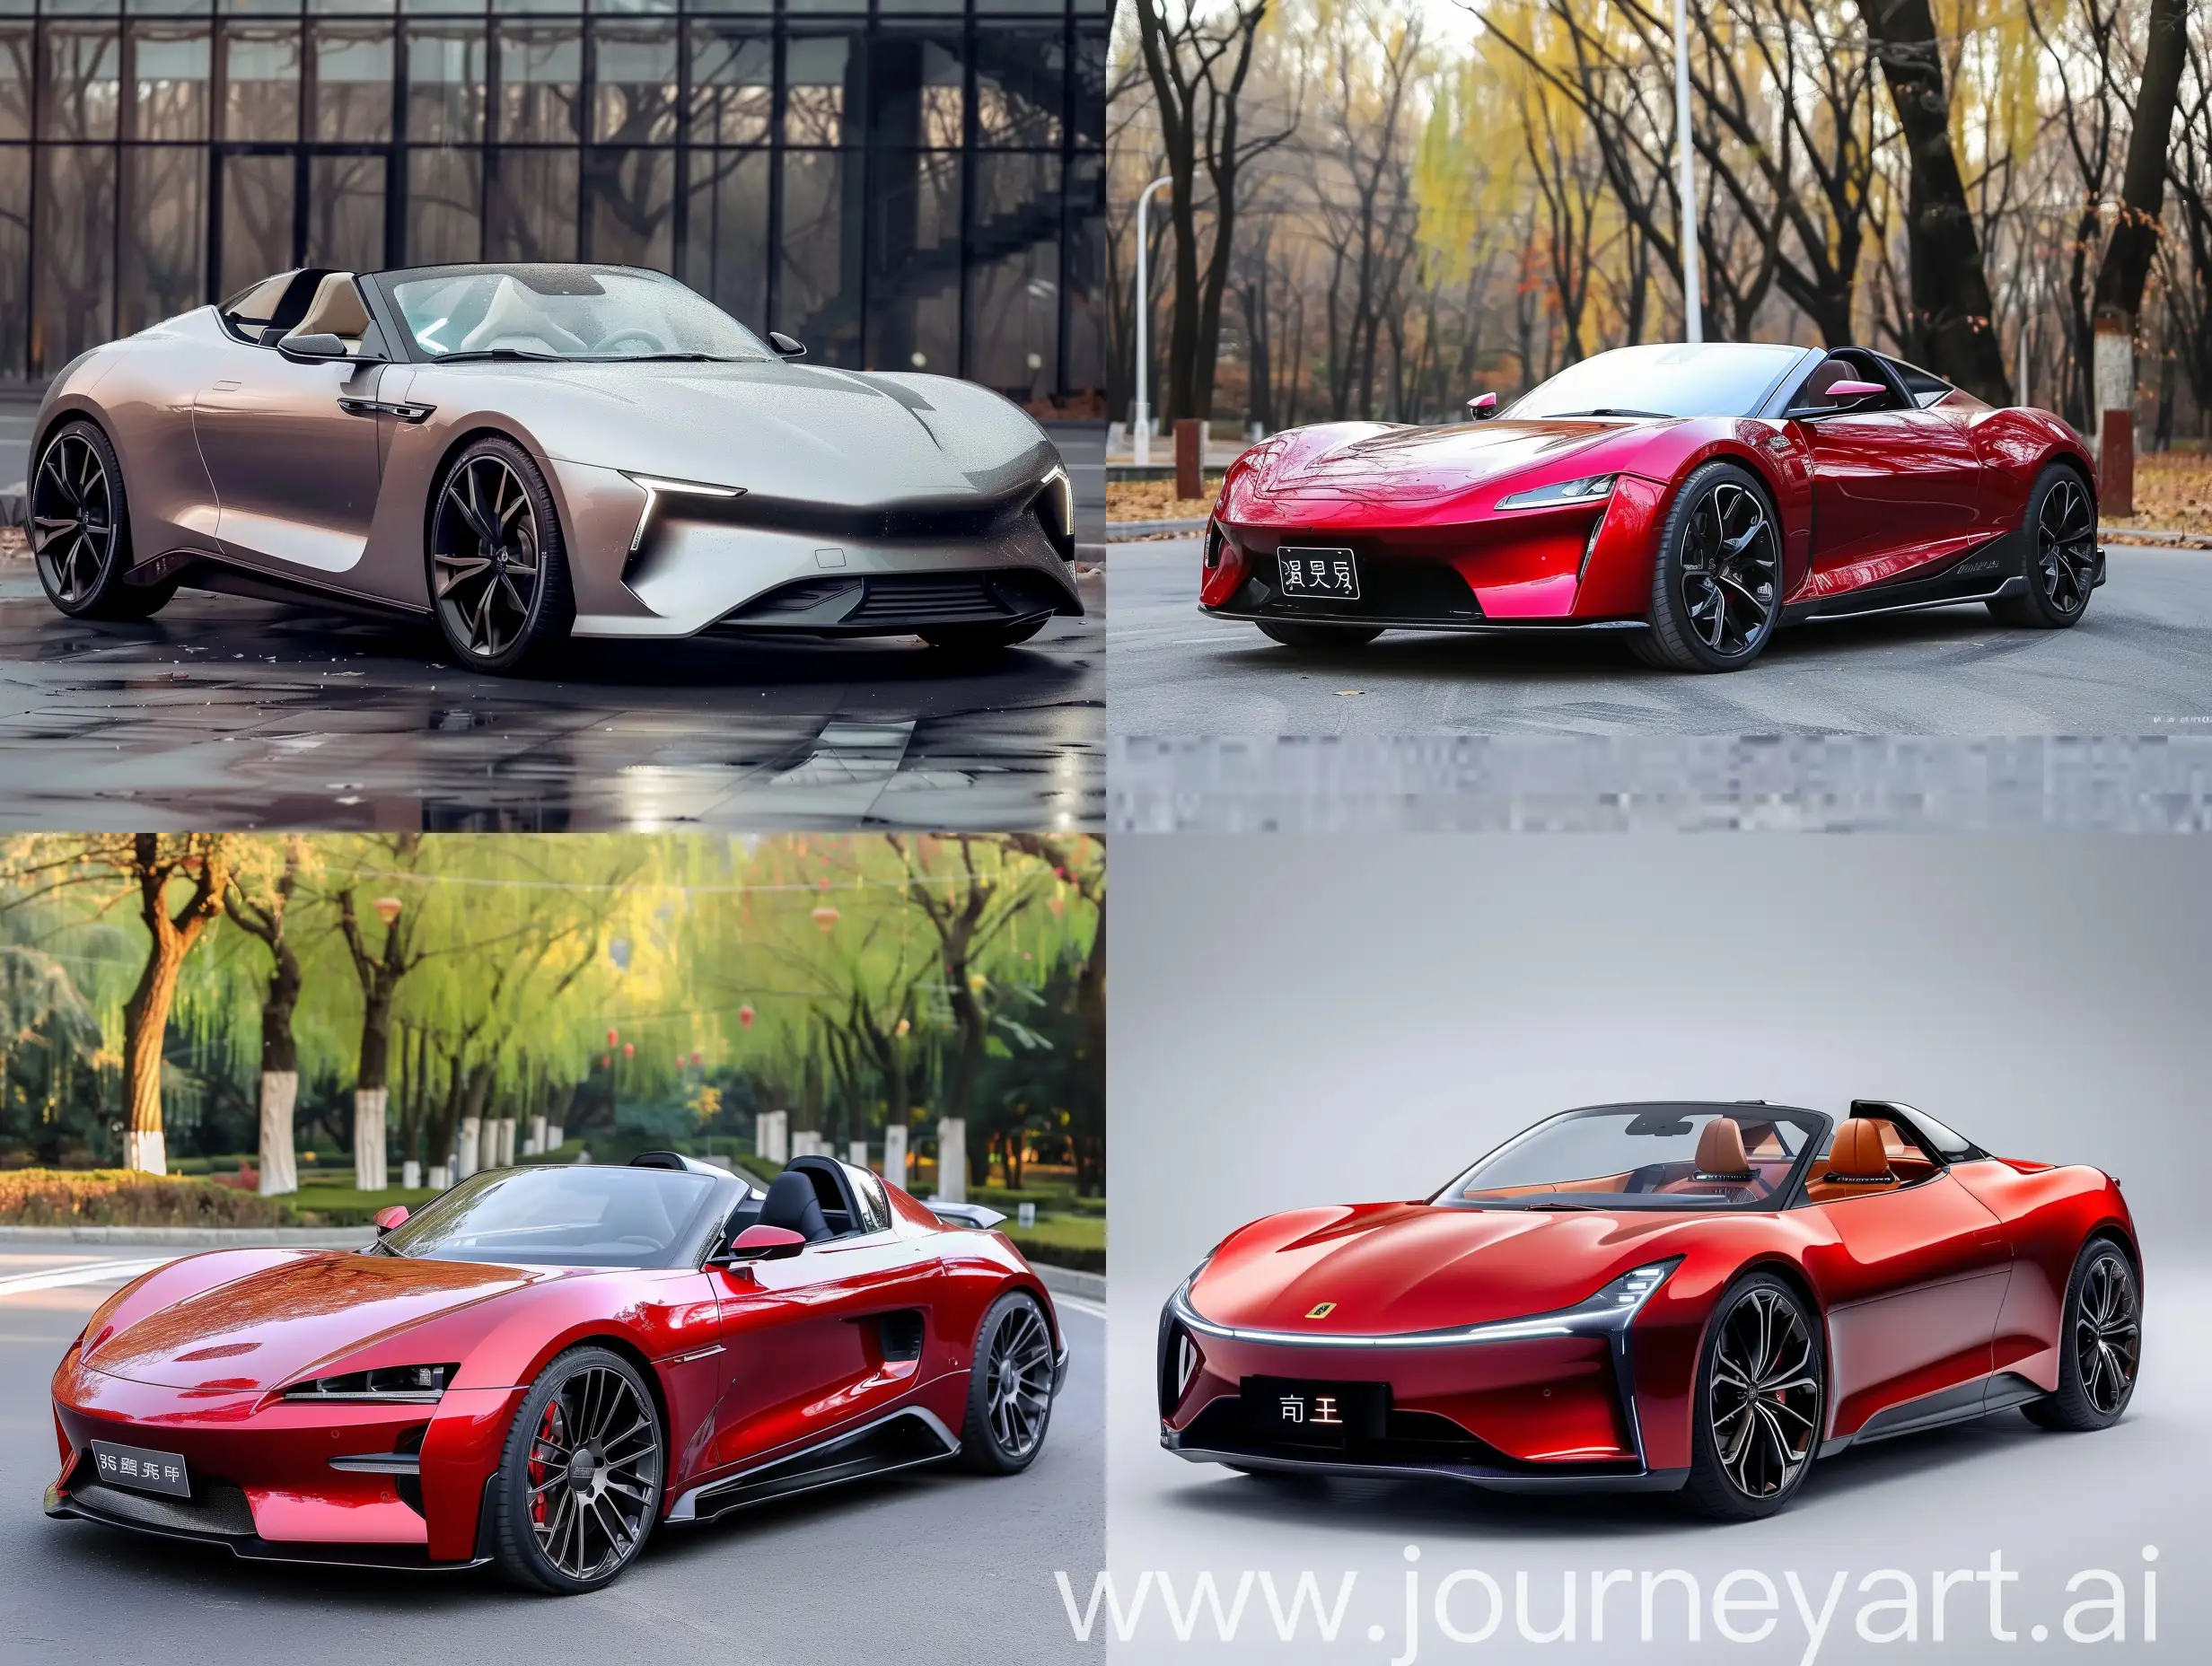 Dynamic-Chinese-Sports-Electric-Car-Roadster-on-Open-Road